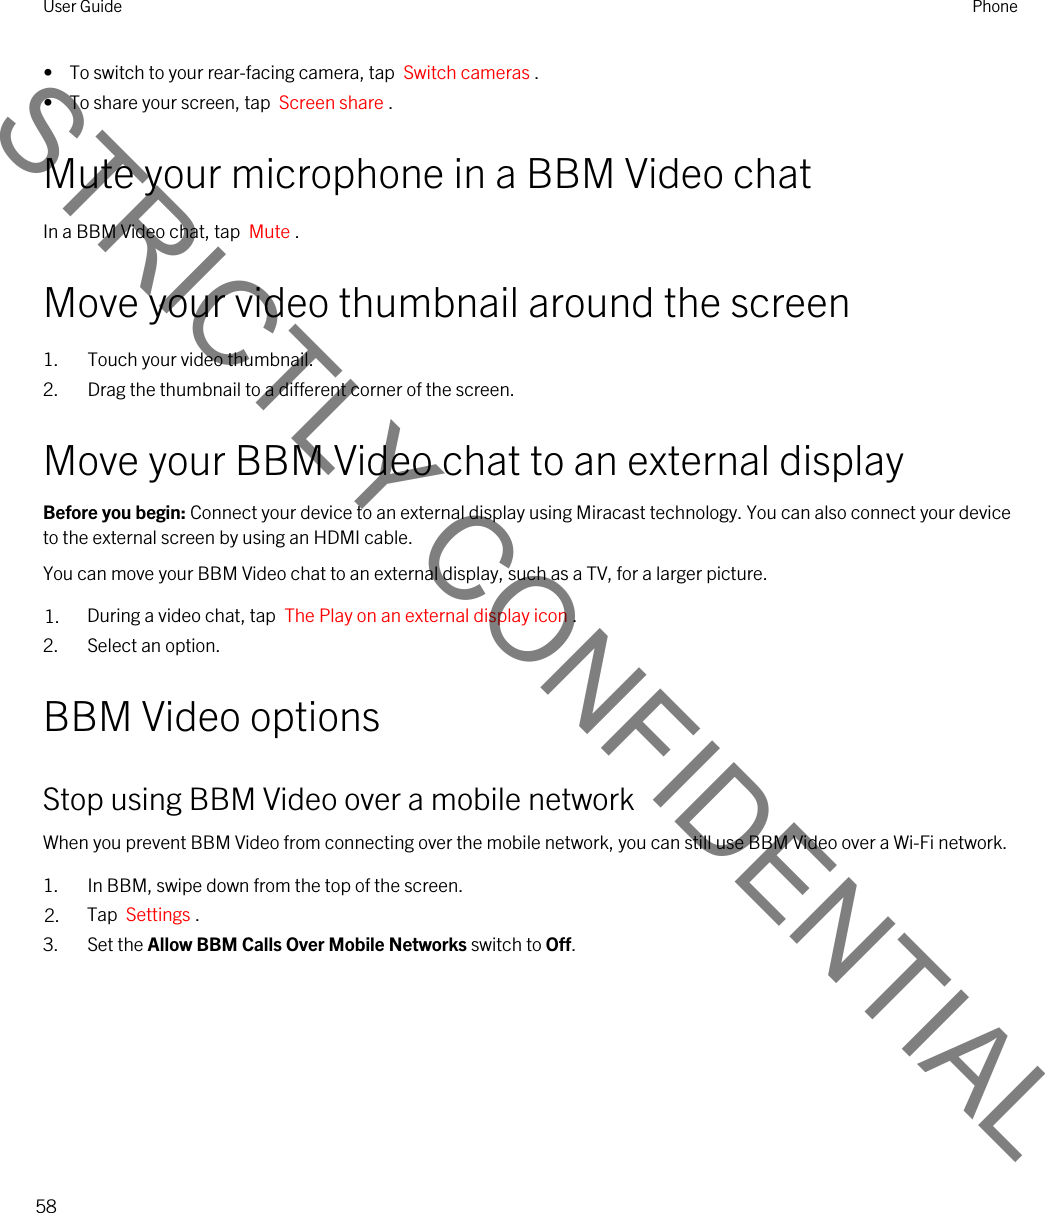 •  To switch to your rear-facing camera, tap  Switch cameras .•  To share your screen, tap  Screen share .Mute your microphone in a BBM Video chatIn a BBM Video chat, tap  Mute .Move your video thumbnail around the screen1. Touch your video thumbnail.2. Drag the thumbnail to a different corner of the screen.Move your BBM Video chat to an external displayBefore you begin: Connect your device to an external display using Miracast technology. You can also connect your device to the external screen by using an HDMI cable.You can move your BBM Video chat to an external display, such as a TV, for a larger picture.1. During a video chat, tap  The Play on an external display icon .2. Select an option.BBM Video optionsStop using BBM Video over a mobile networkWhen you prevent BBM Video from connecting over the mobile network, you can still use BBM Video over a Wi-Fi network.1. In BBM, swipe down from the top of the screen.2. Tap  Settings .3. Set the Allow BBM Calls Over Mobile Networks switch to Off.User Guide Phone58STRICTLY CONFIDENTIAL